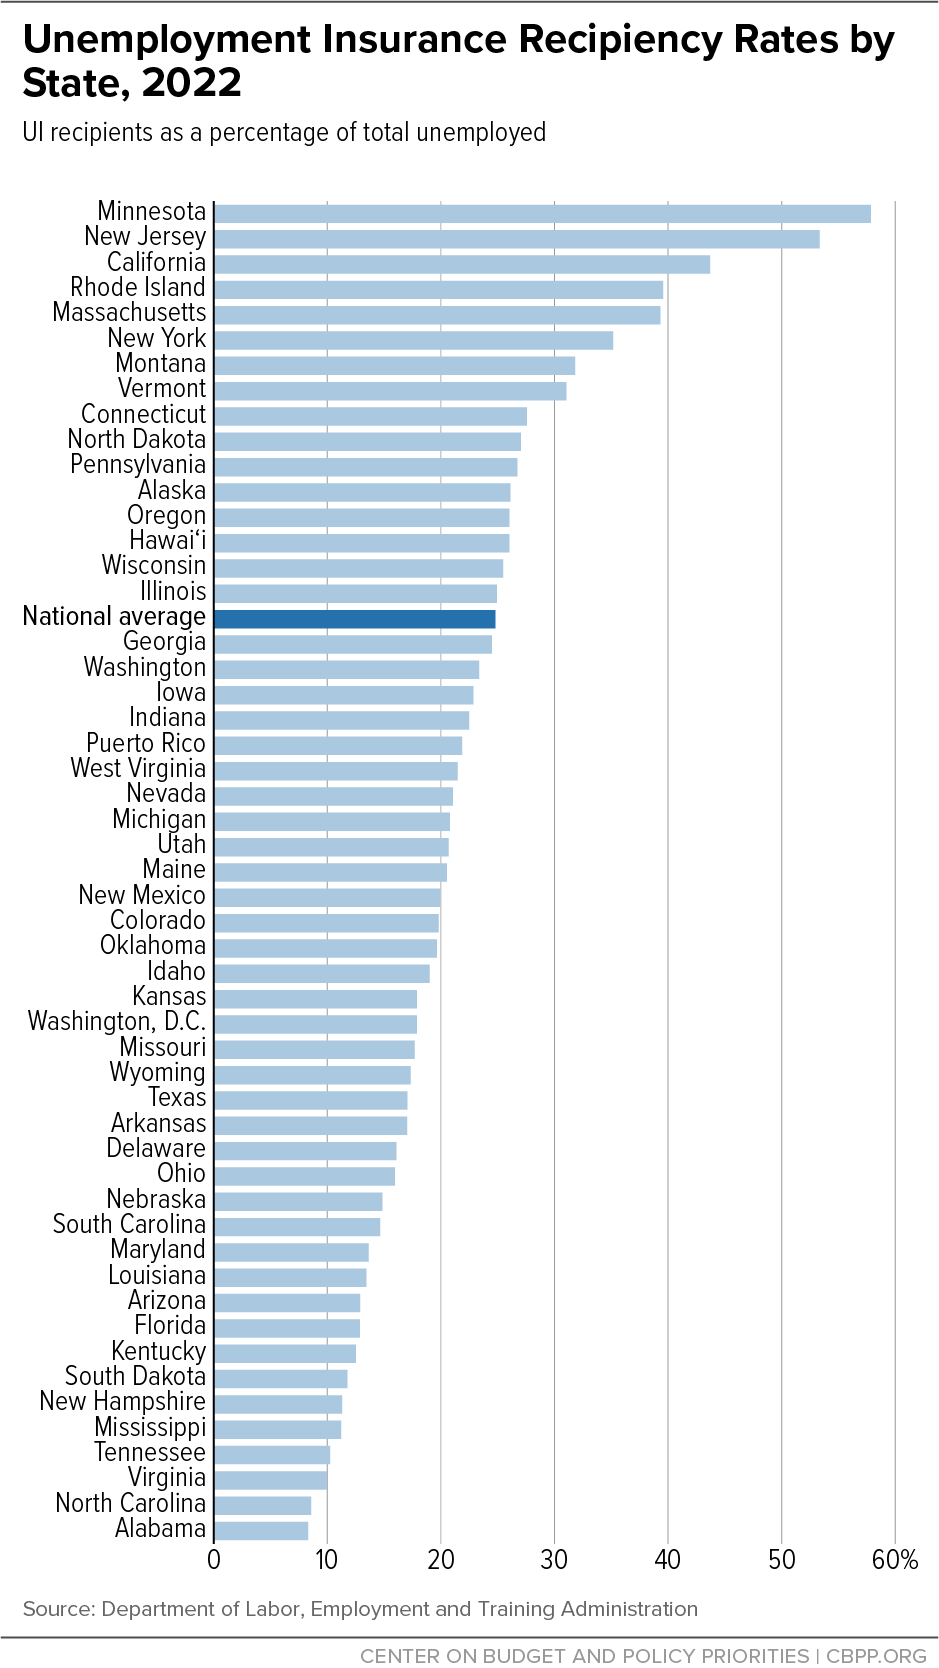 Unemployment Insurance Recipiency Rates by State, 2022